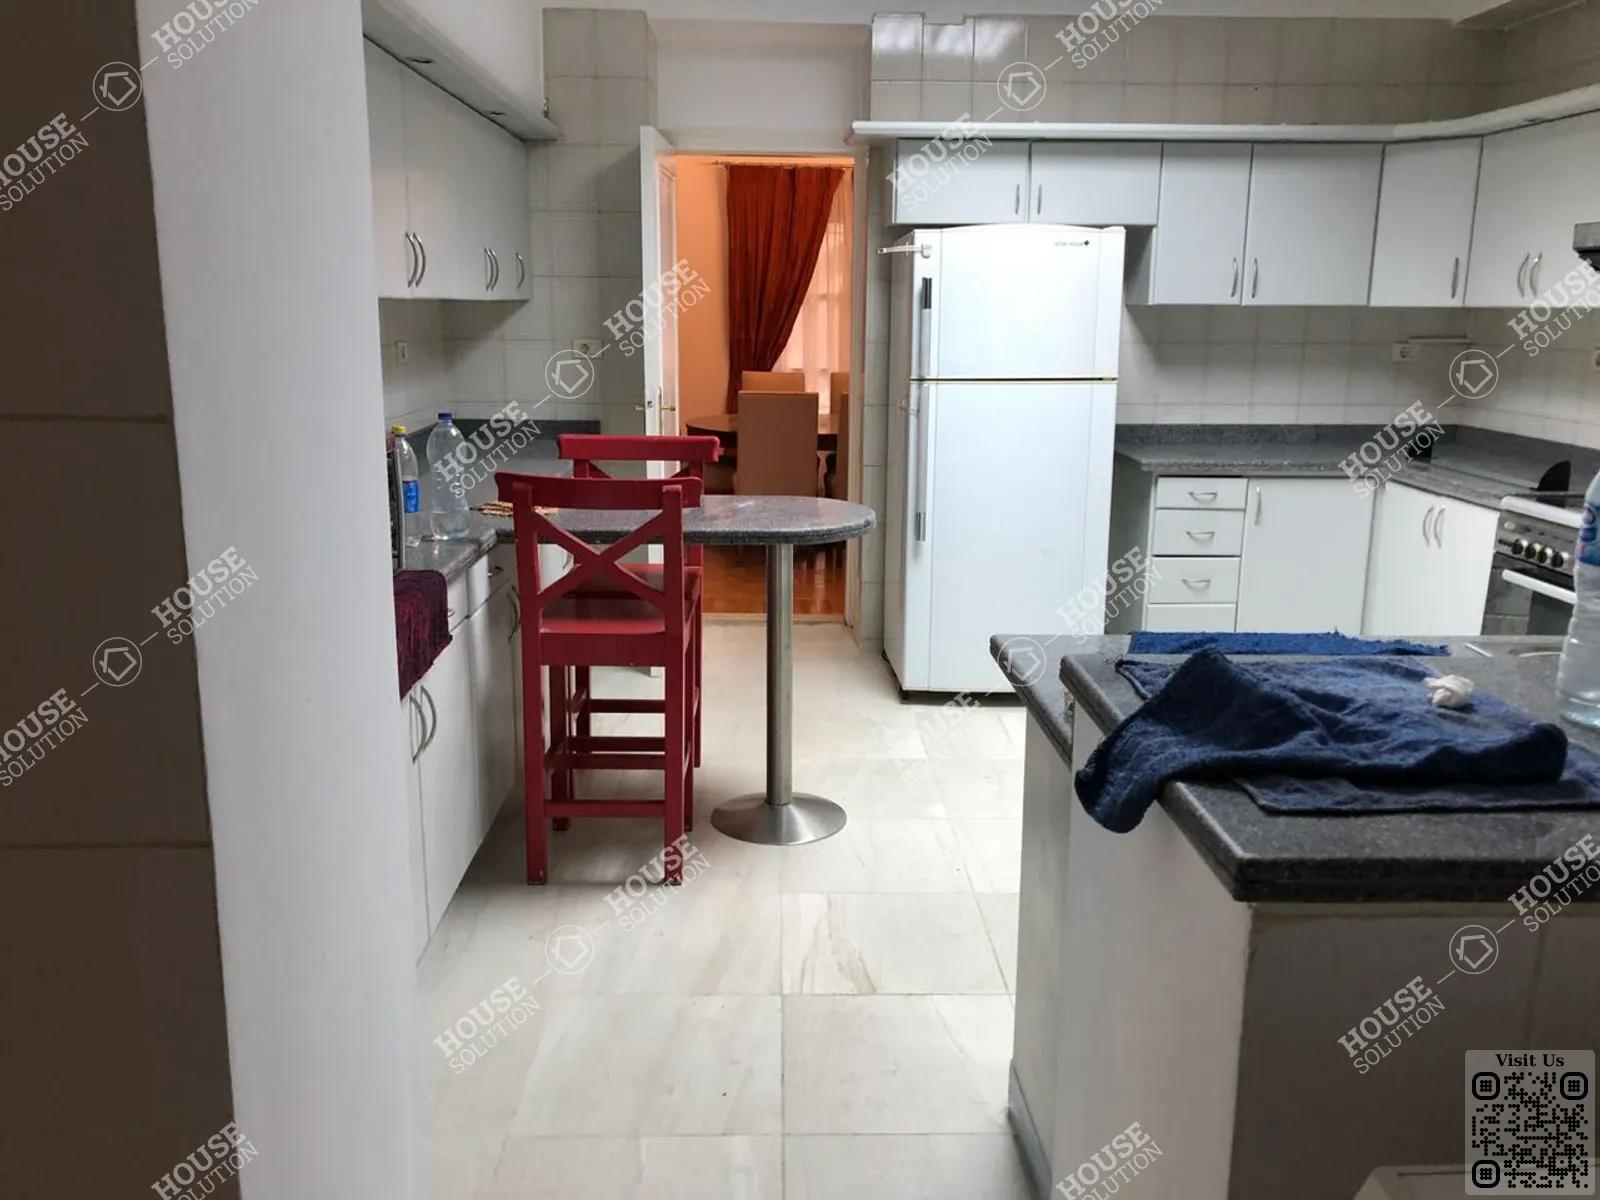 KITCHEN  @ Apartments For Rent In Maadi Maadi Sarayat Area: 320 m² consists of 4 Bedrooms 3 Bathrooms Modern furnished 5 stars #3042-2